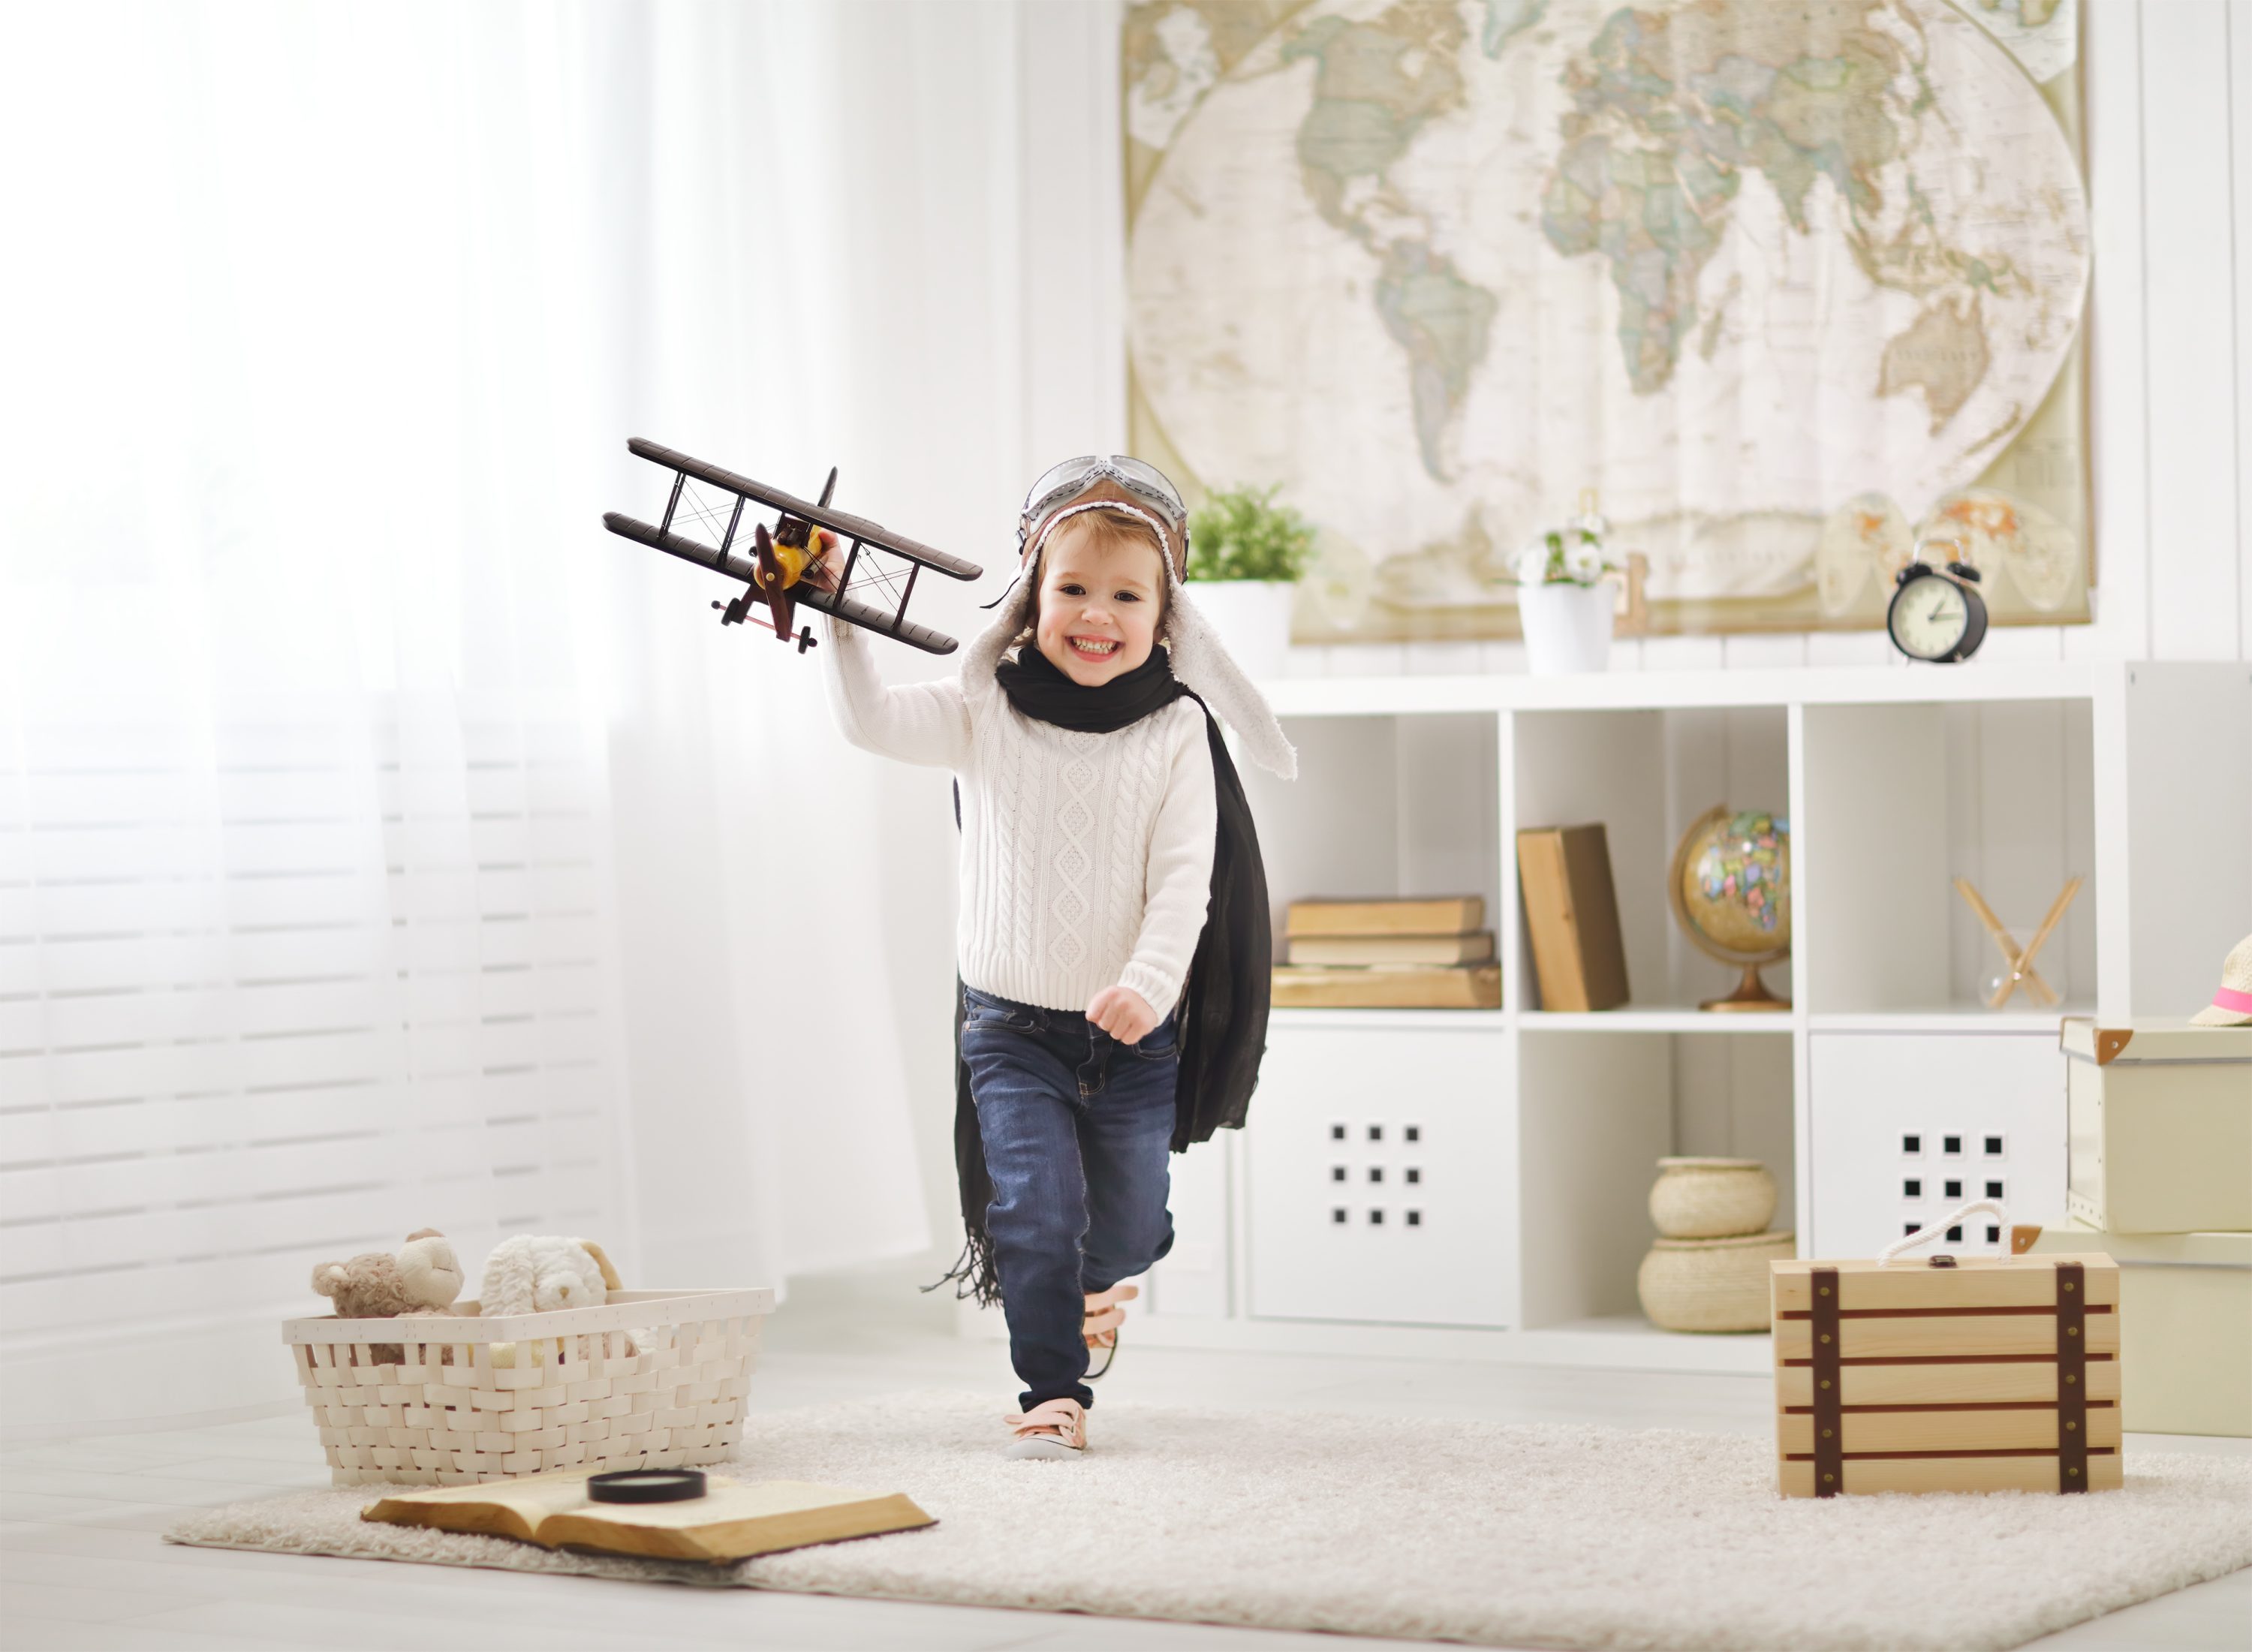 child flying toy airplane in playroom